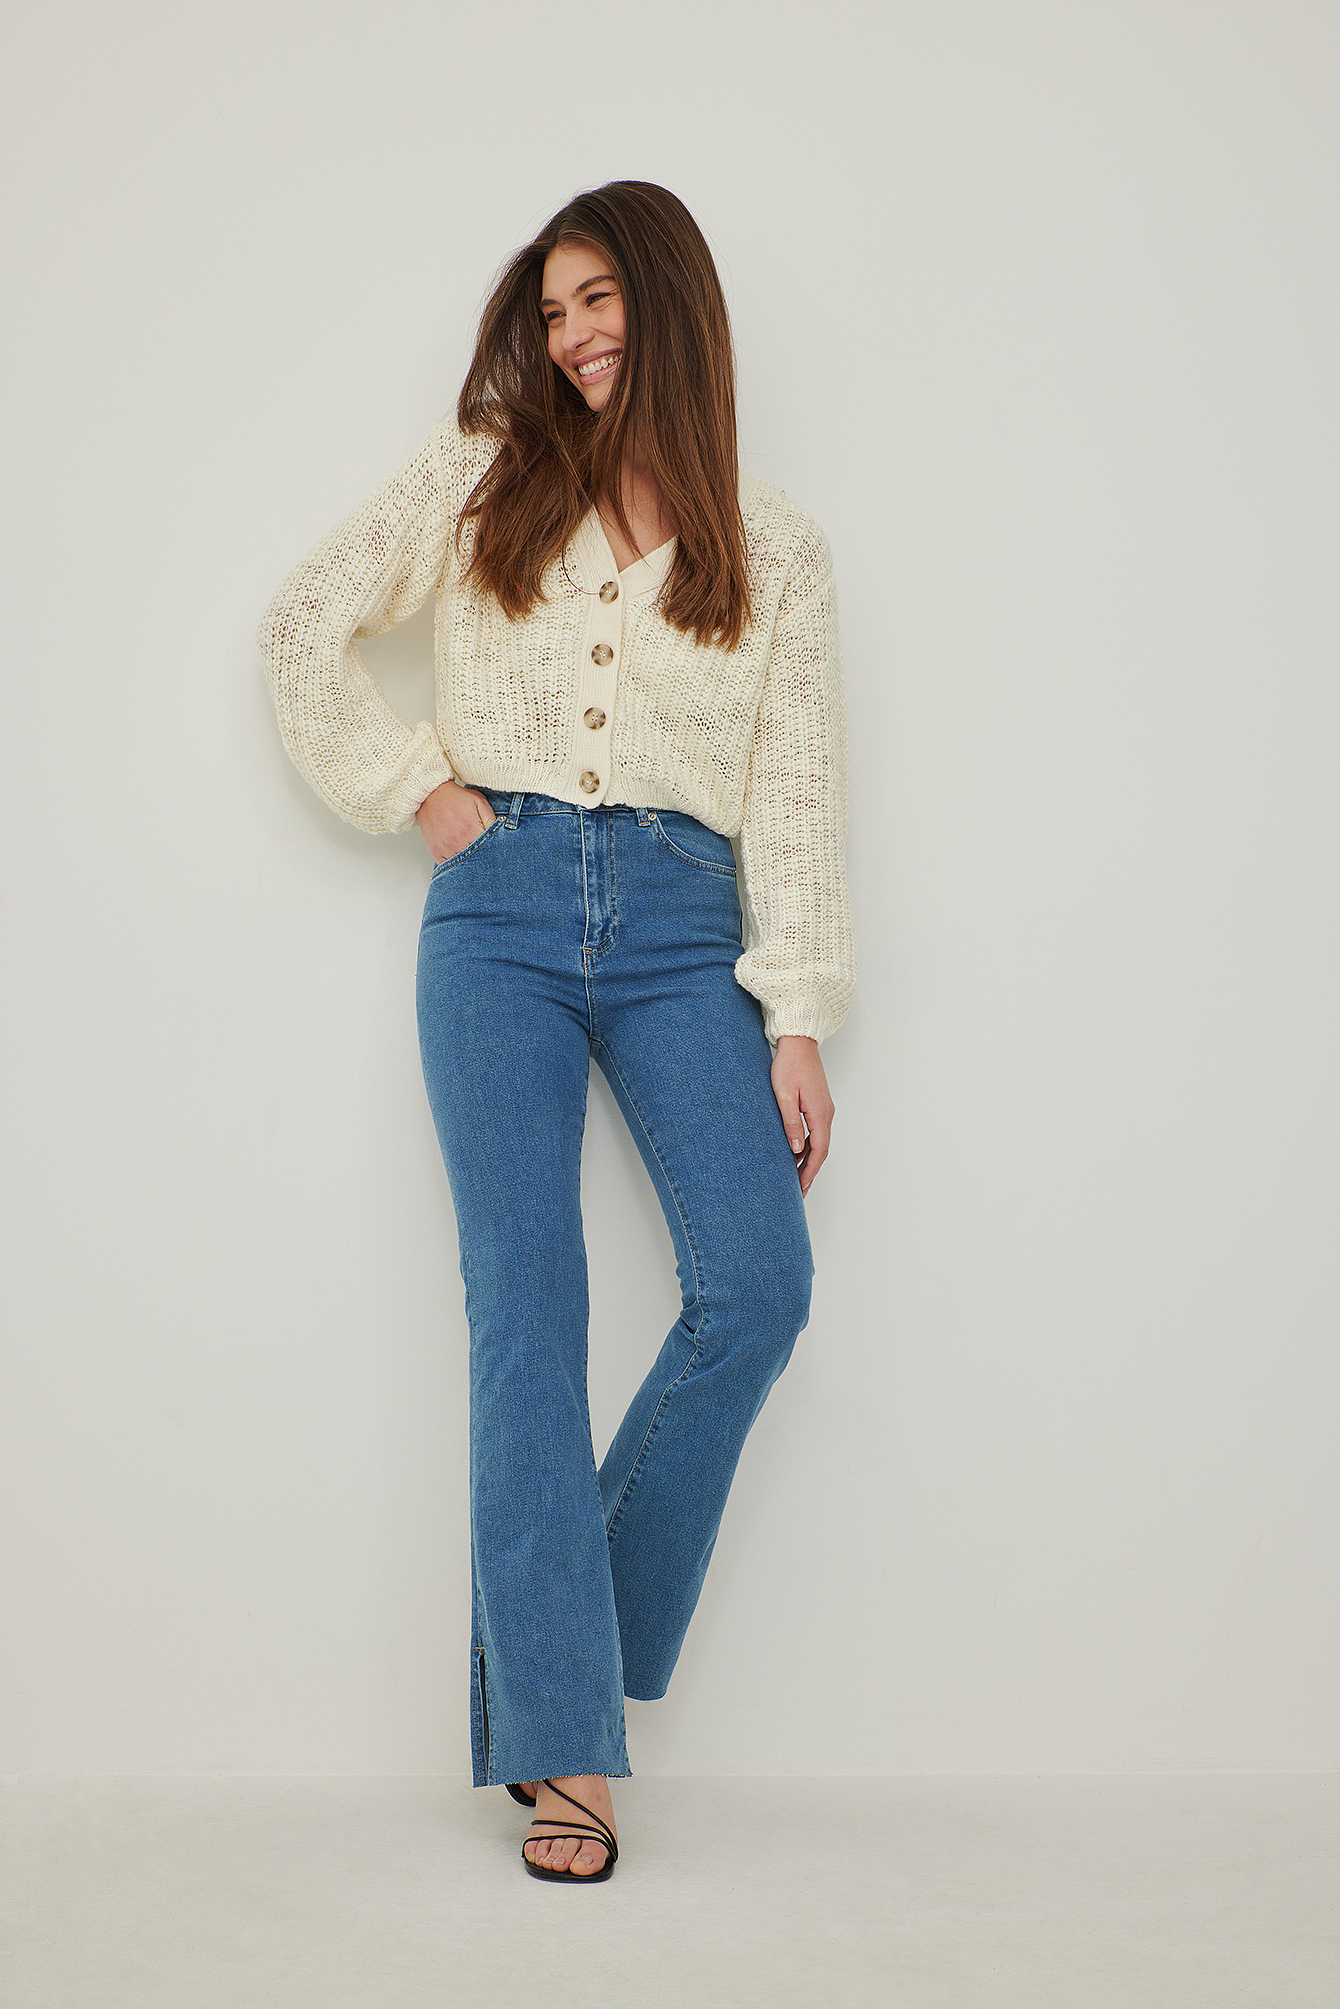 Cream Textured Knitted Cardigan